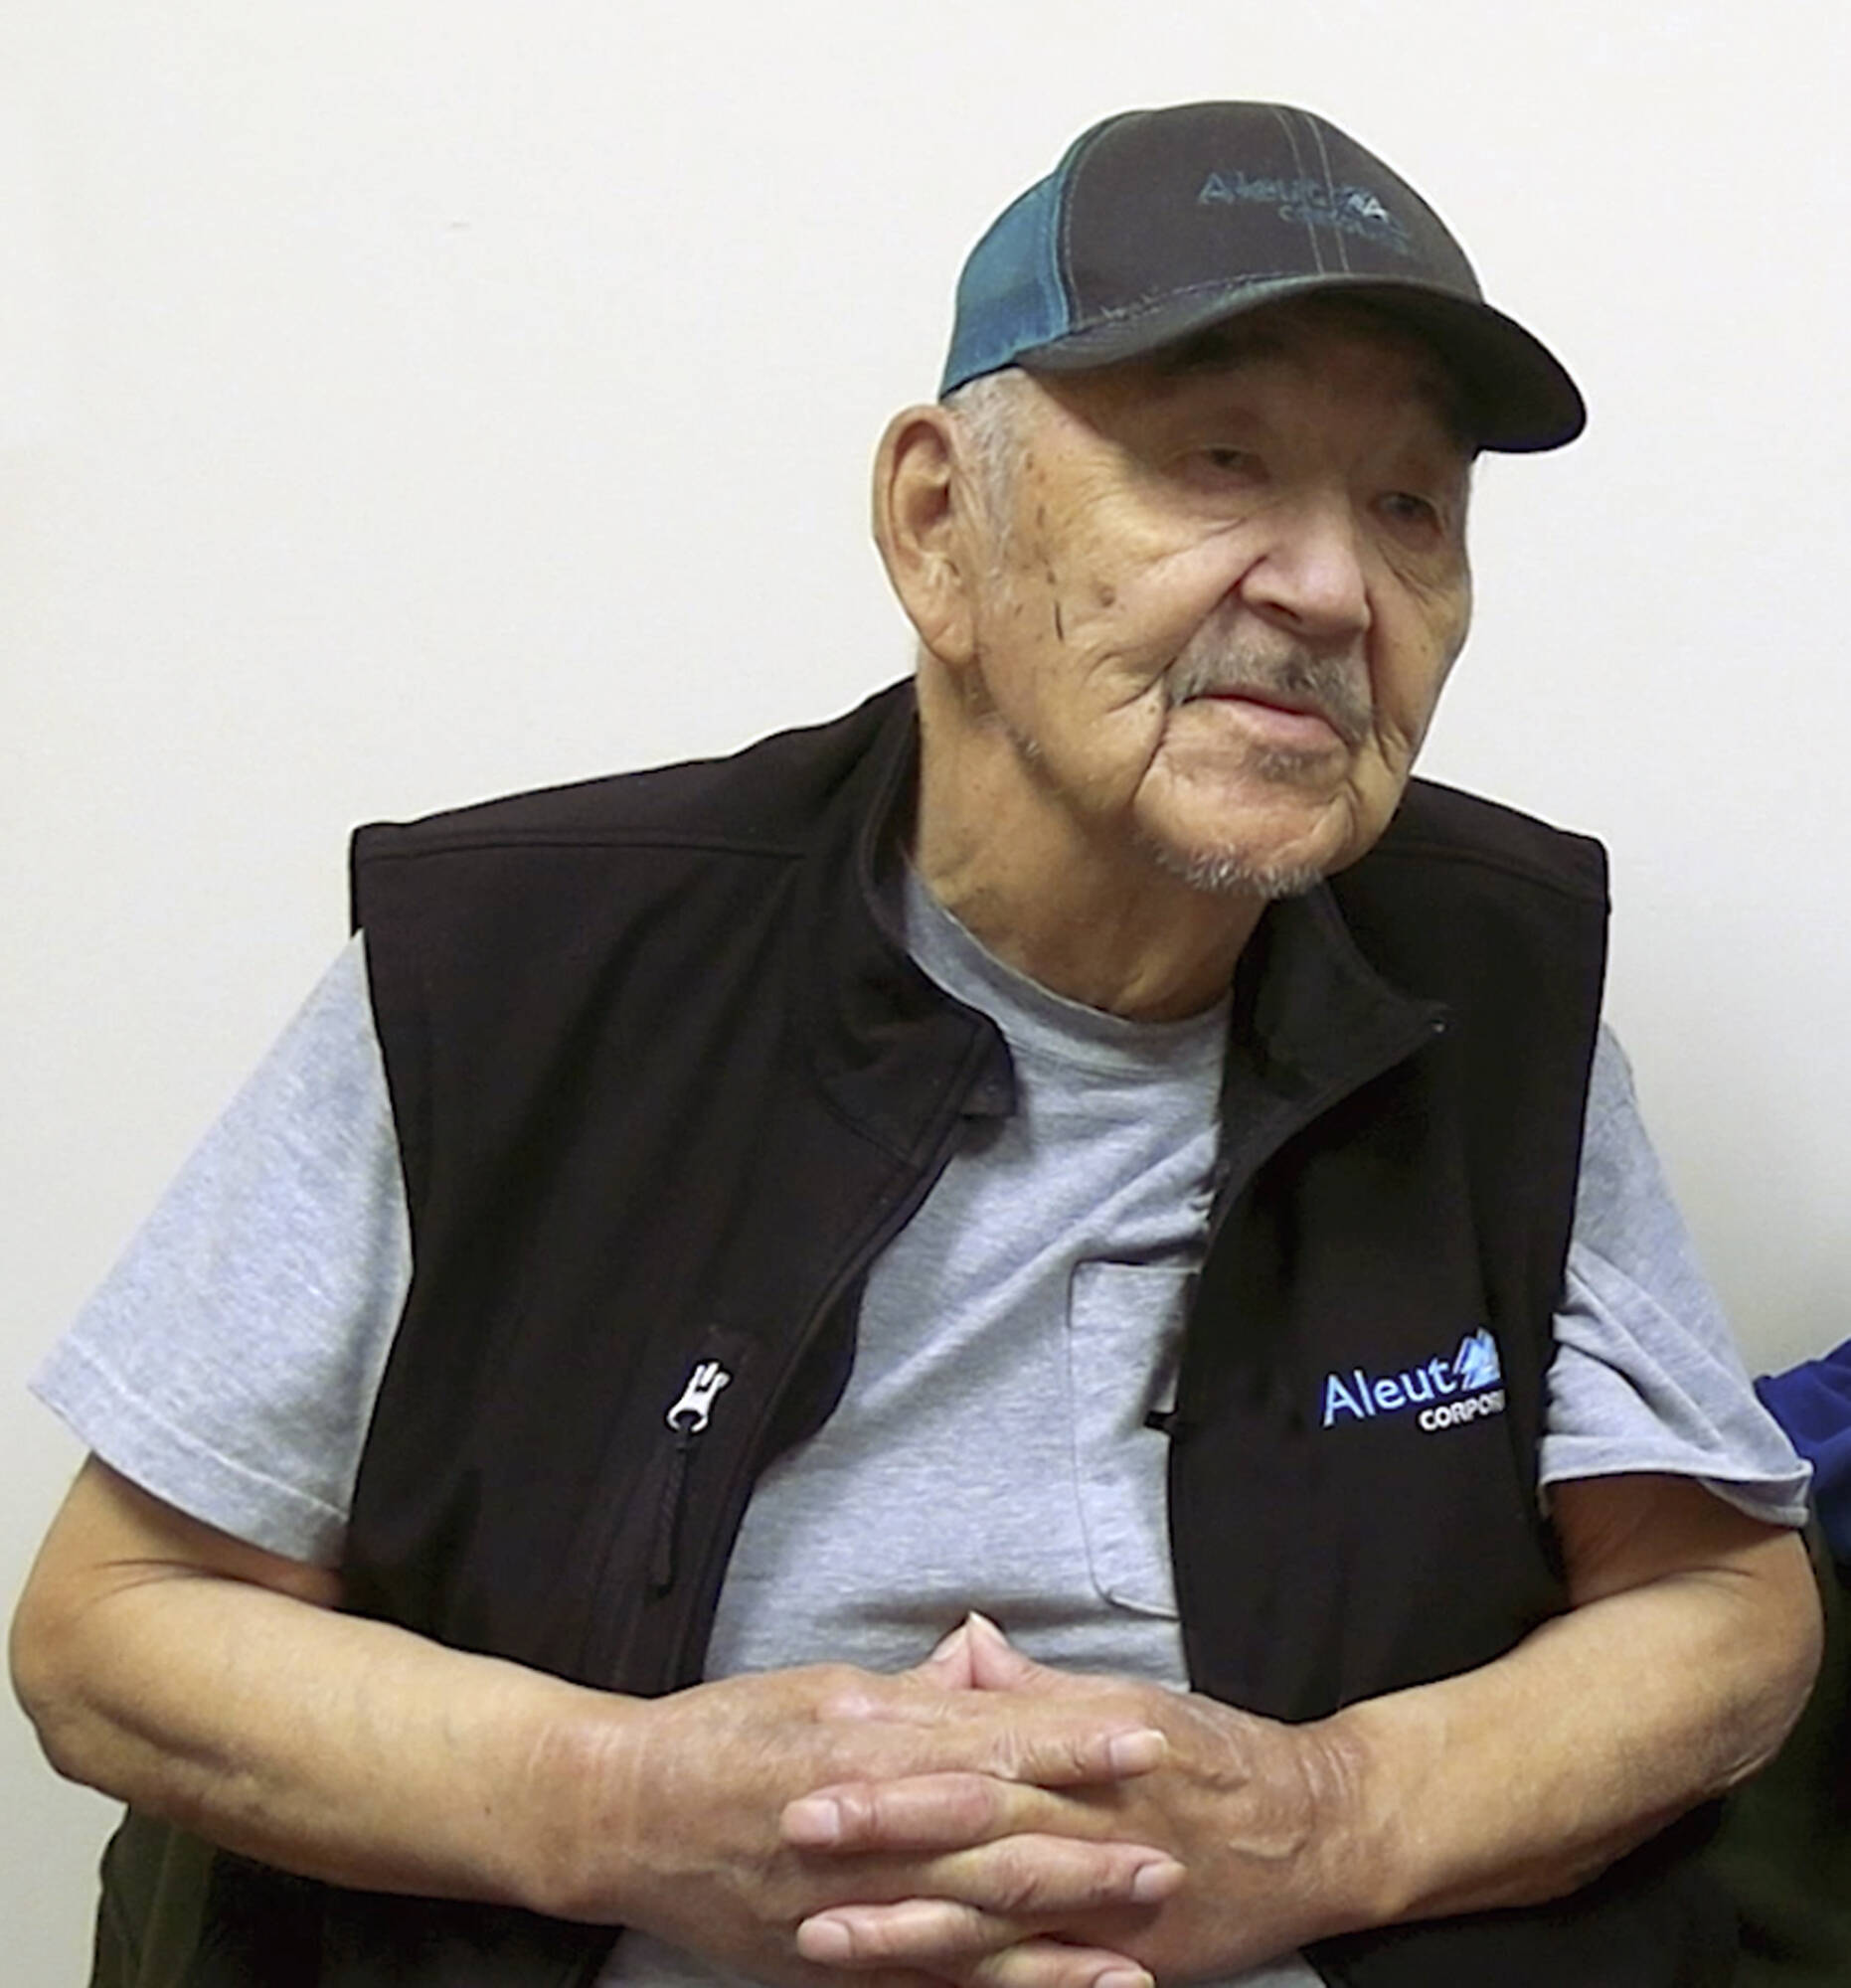 In this photo provided by Aleutian Pribilof Islands Association, Inc., Gregory Golodoff takes part in an interview, April 26, 2023, at the association’s office in Anchorage, Alaska. Golodoff, who died on Nov. 17, 2023, was the last living resident of Attu, Alaska, whose residents were captured by the Japanese in World War II. Residents were interned in Japan during the war, and most resettled in Atka, Alaska, after the war concluded. (Chrissy Roes/Aleutian Pribilof Islands Association, Inc. via AP)